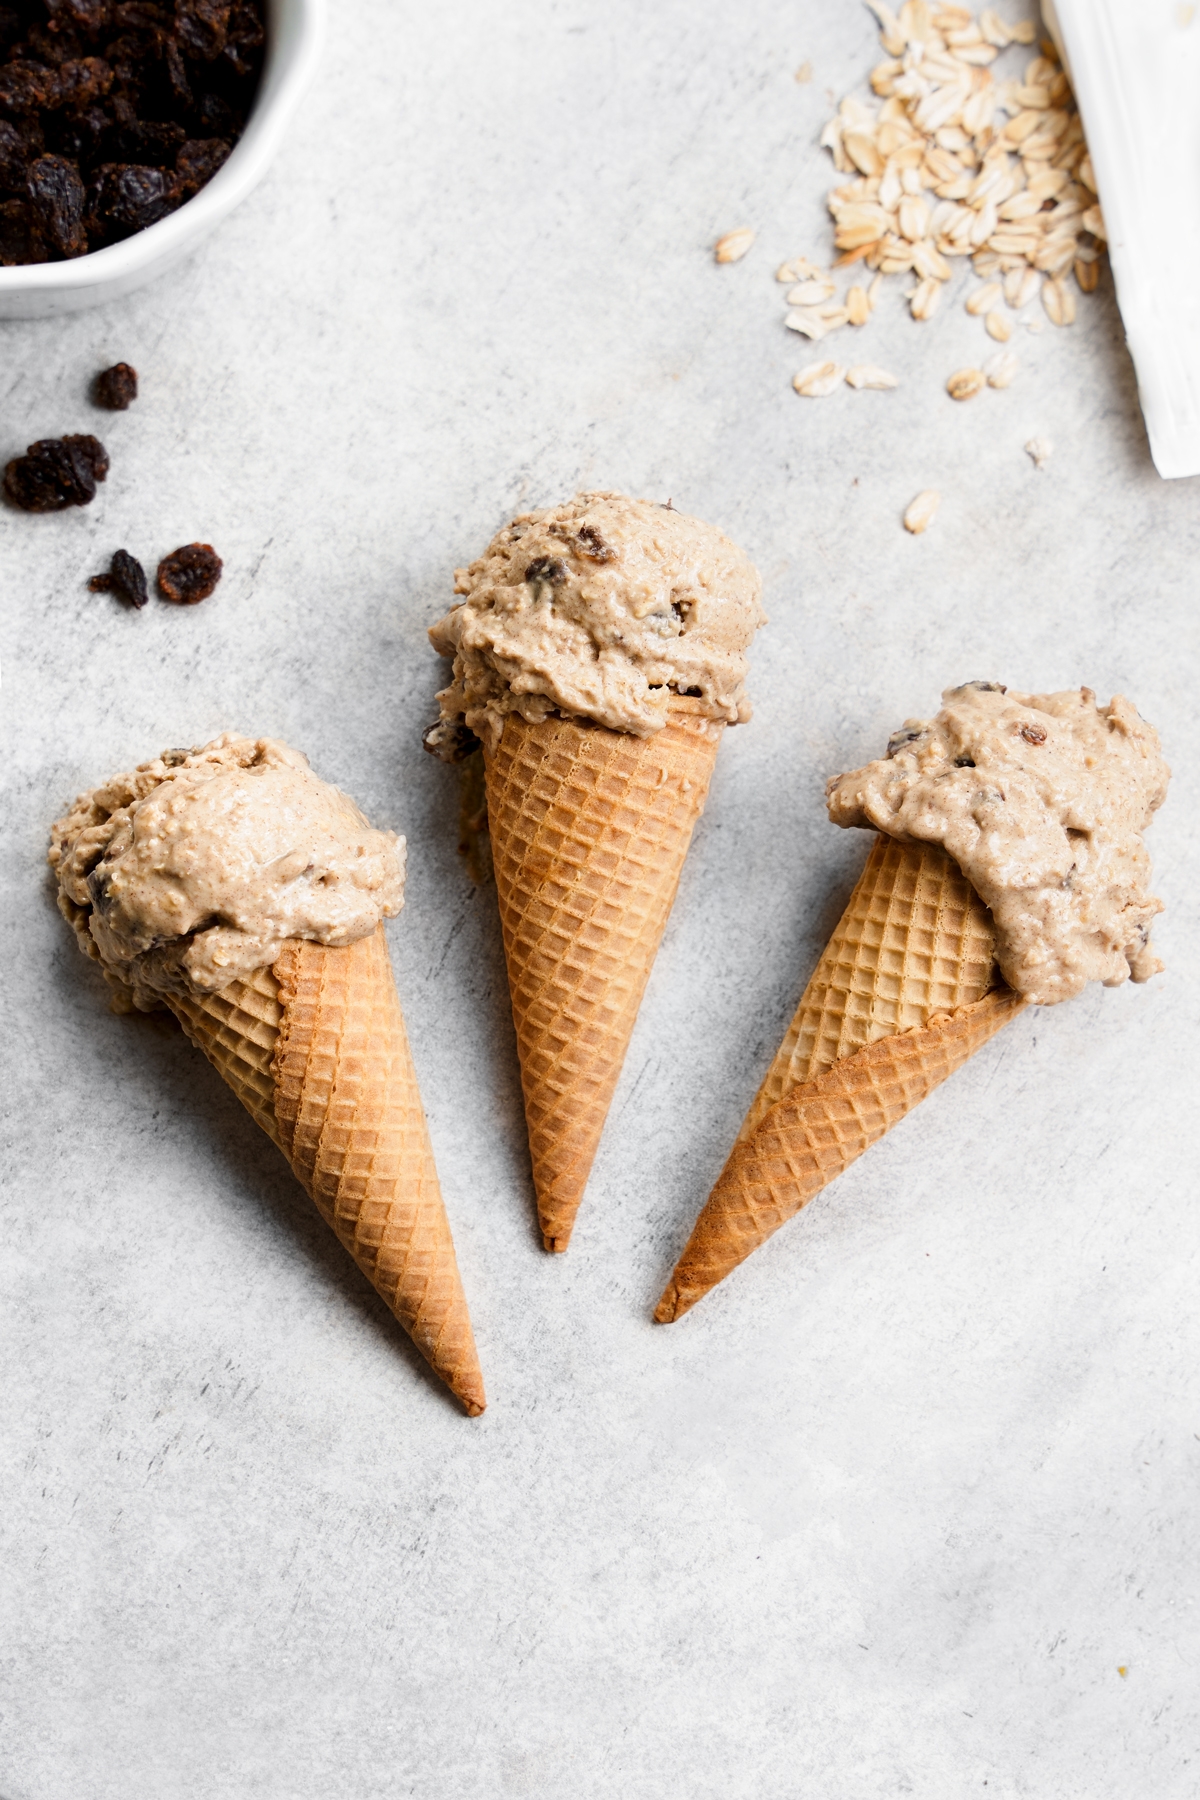 the oatmeal raisin ice cream scooped into cones laying flat on the surface